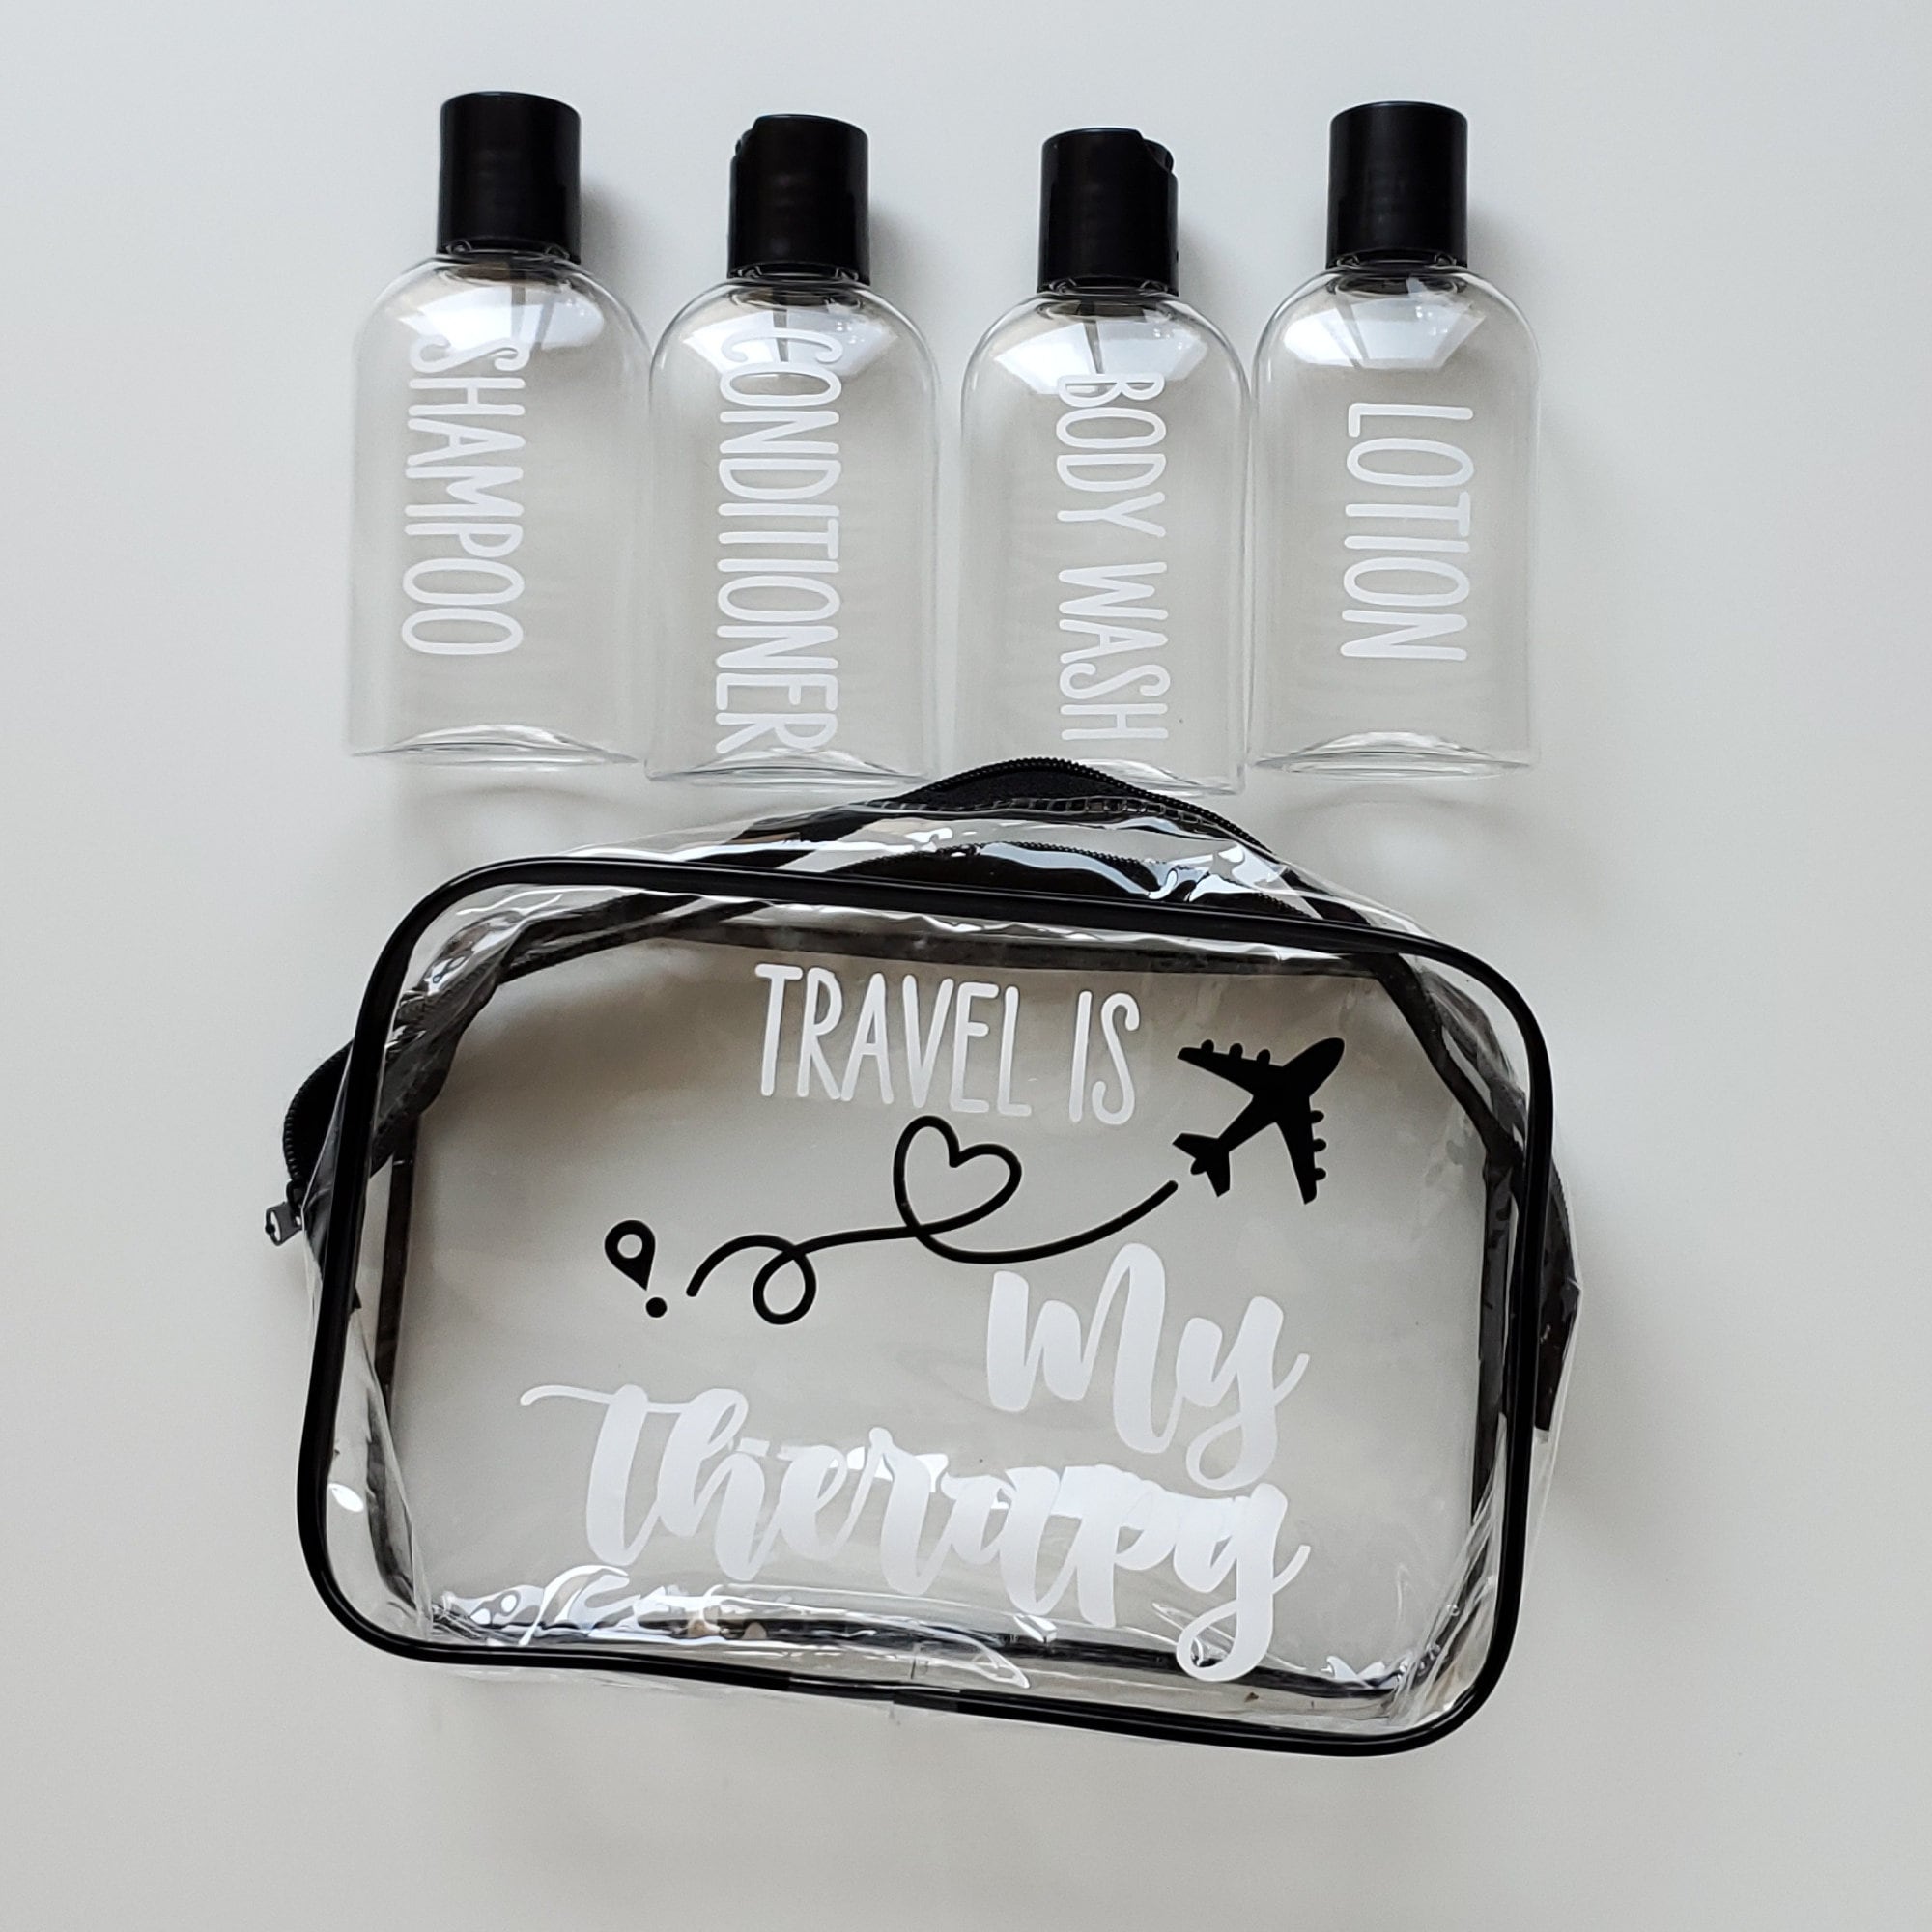 TSA-Compliant Durable Plastic Travel Bottles Set – 4 Squeezable Portable  Bottles in Clear Zippered Pouch for Shampoo, Lotion, Conditioner & More 